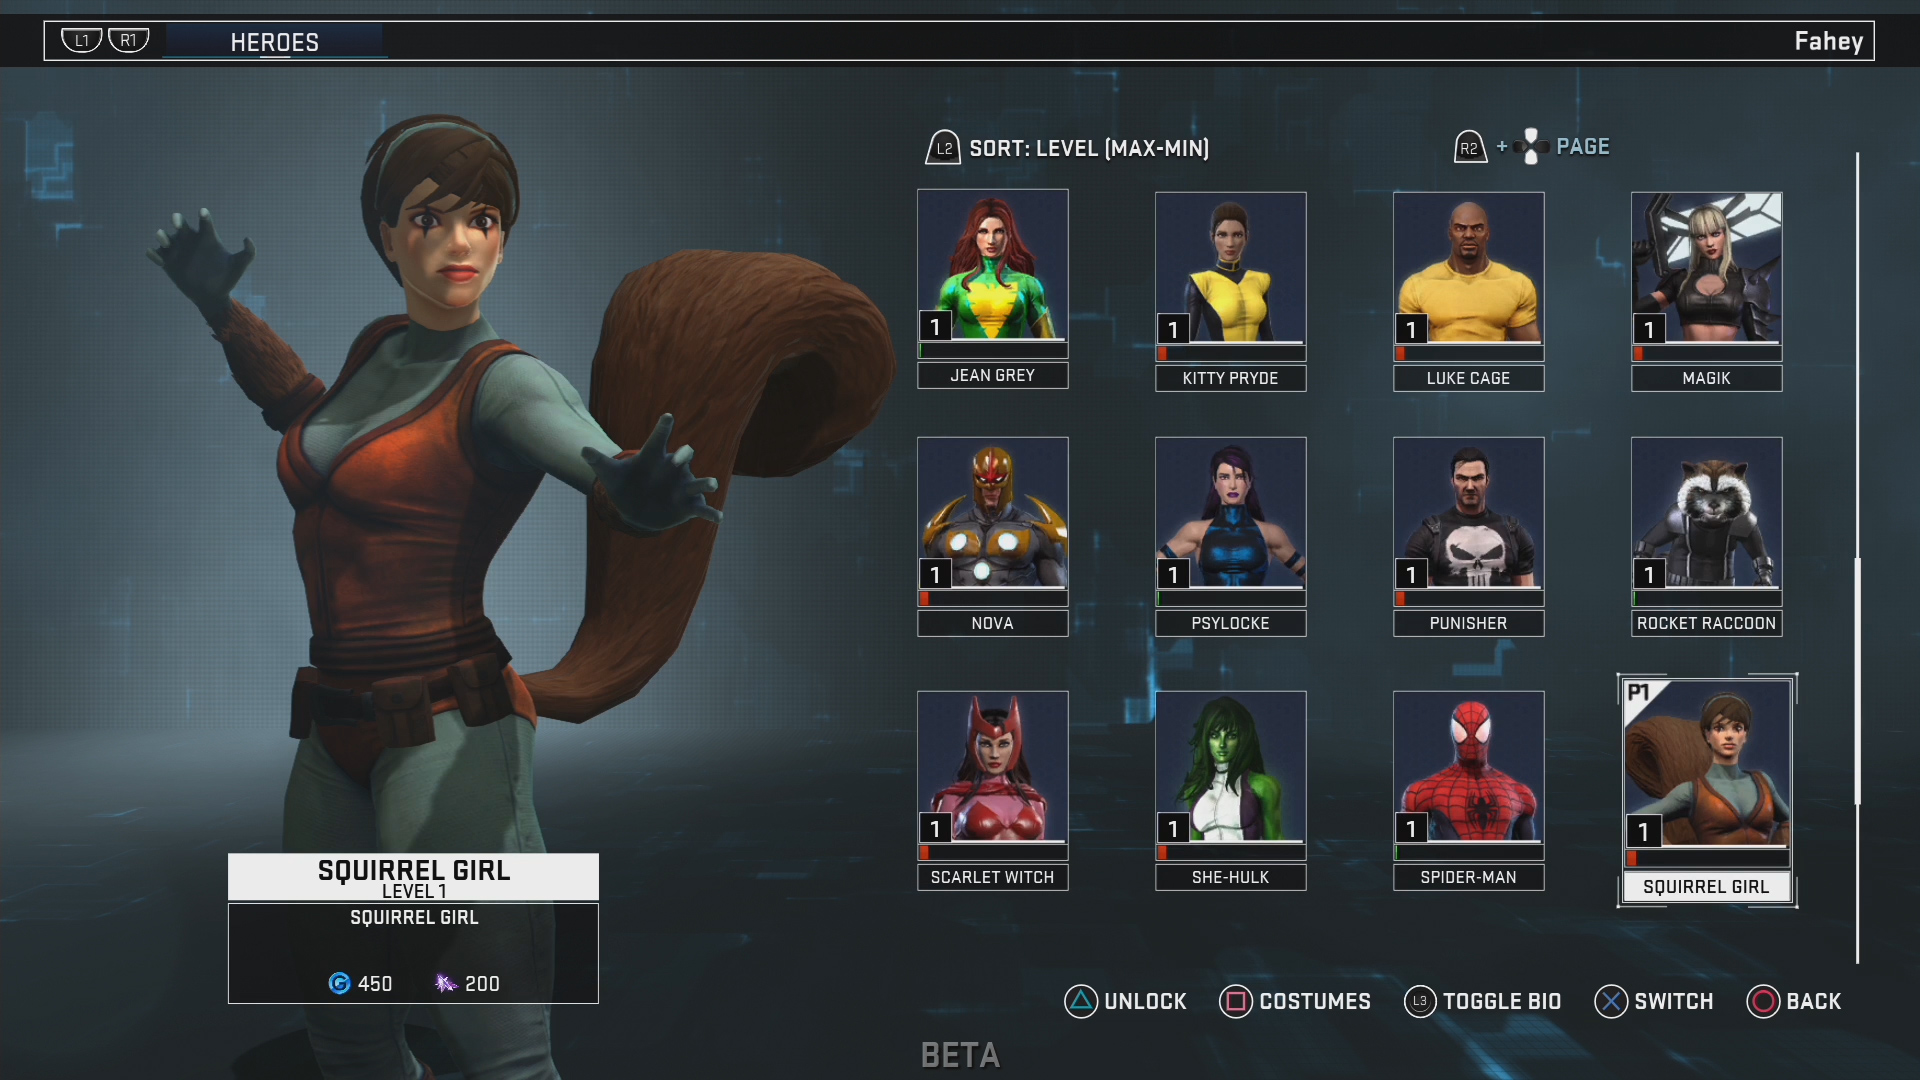 PSA: Prepare to dive into the house of ideas, Marvel Heroes Omega open beta  is live.